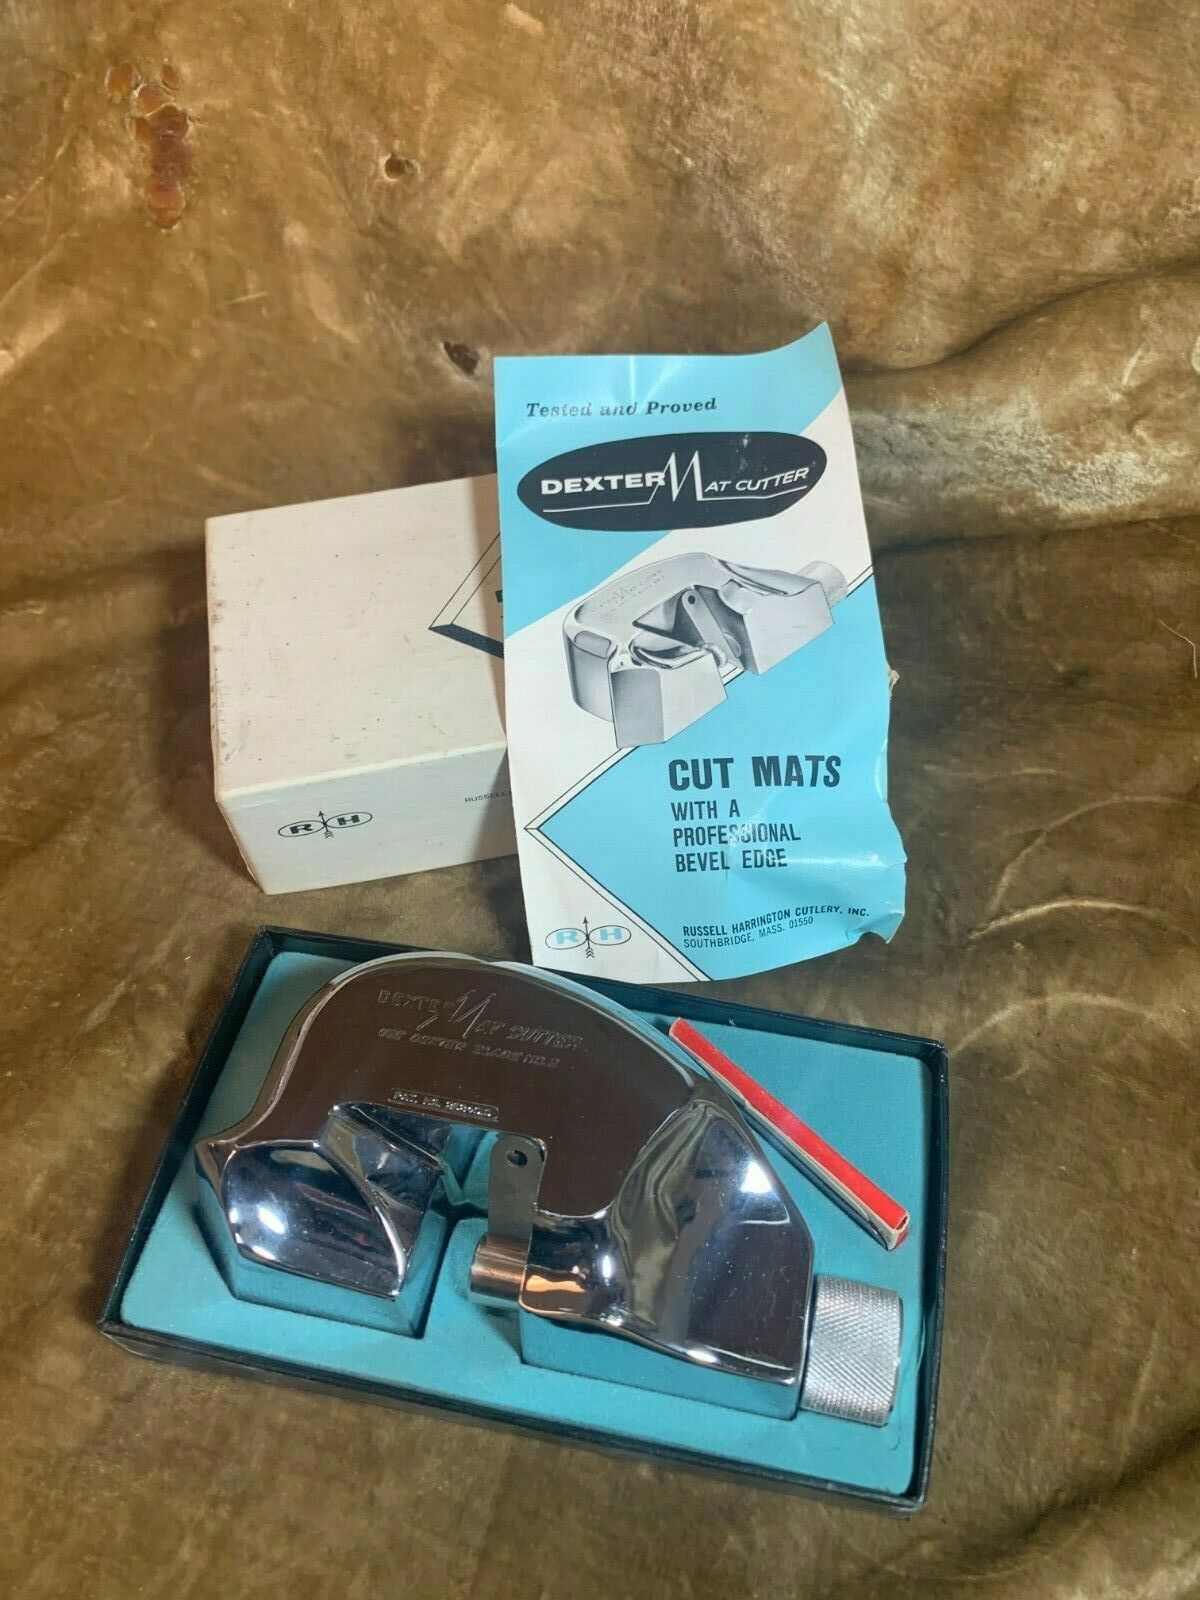 Dexter Mat Cutter Unused In Box With Manual